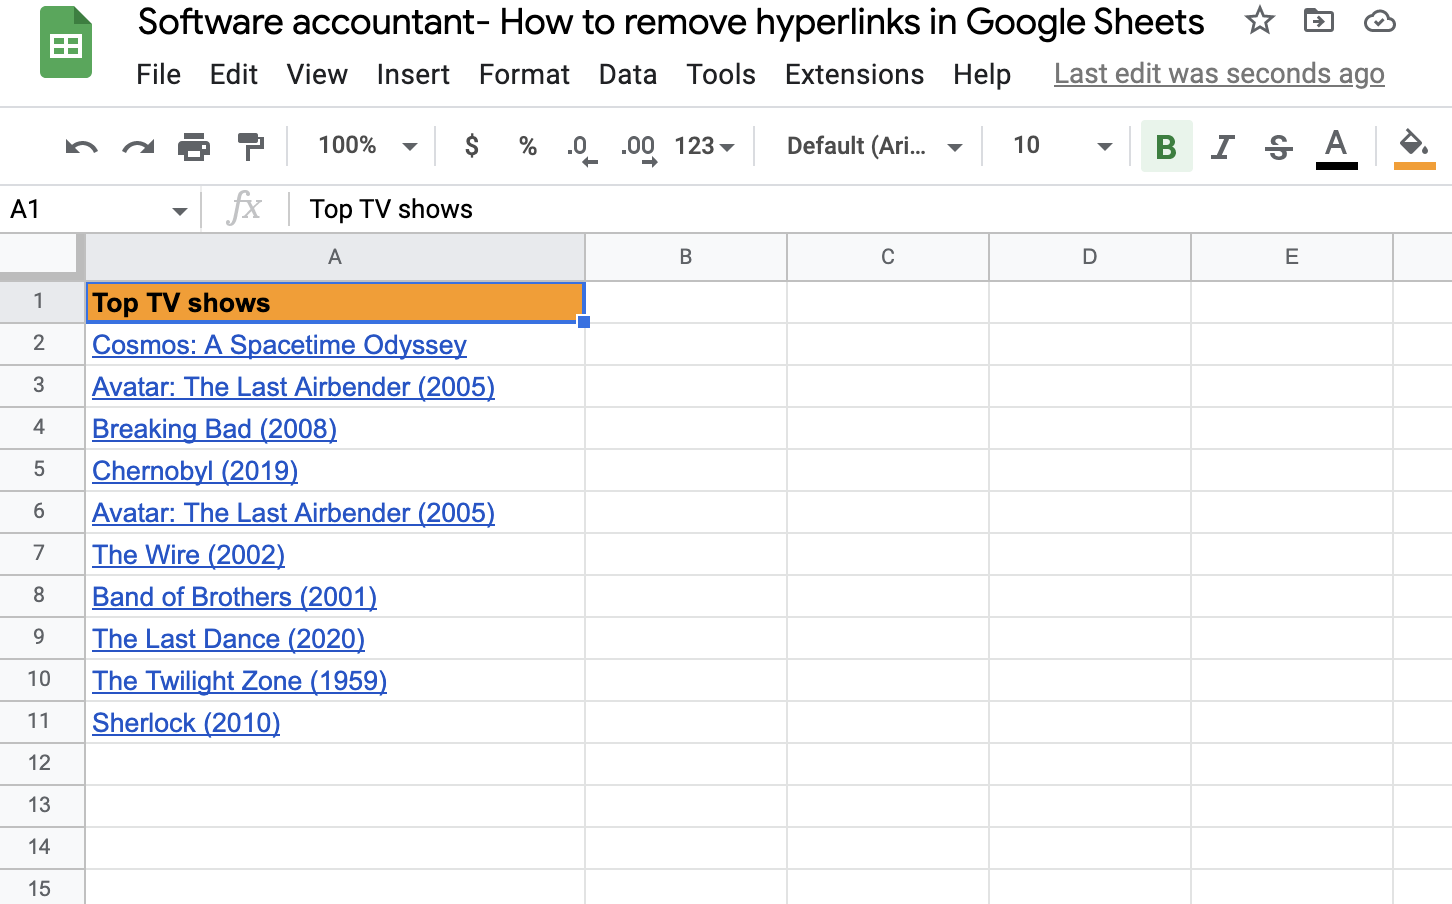 Remove hyperlinks in Google Sheets using a formula